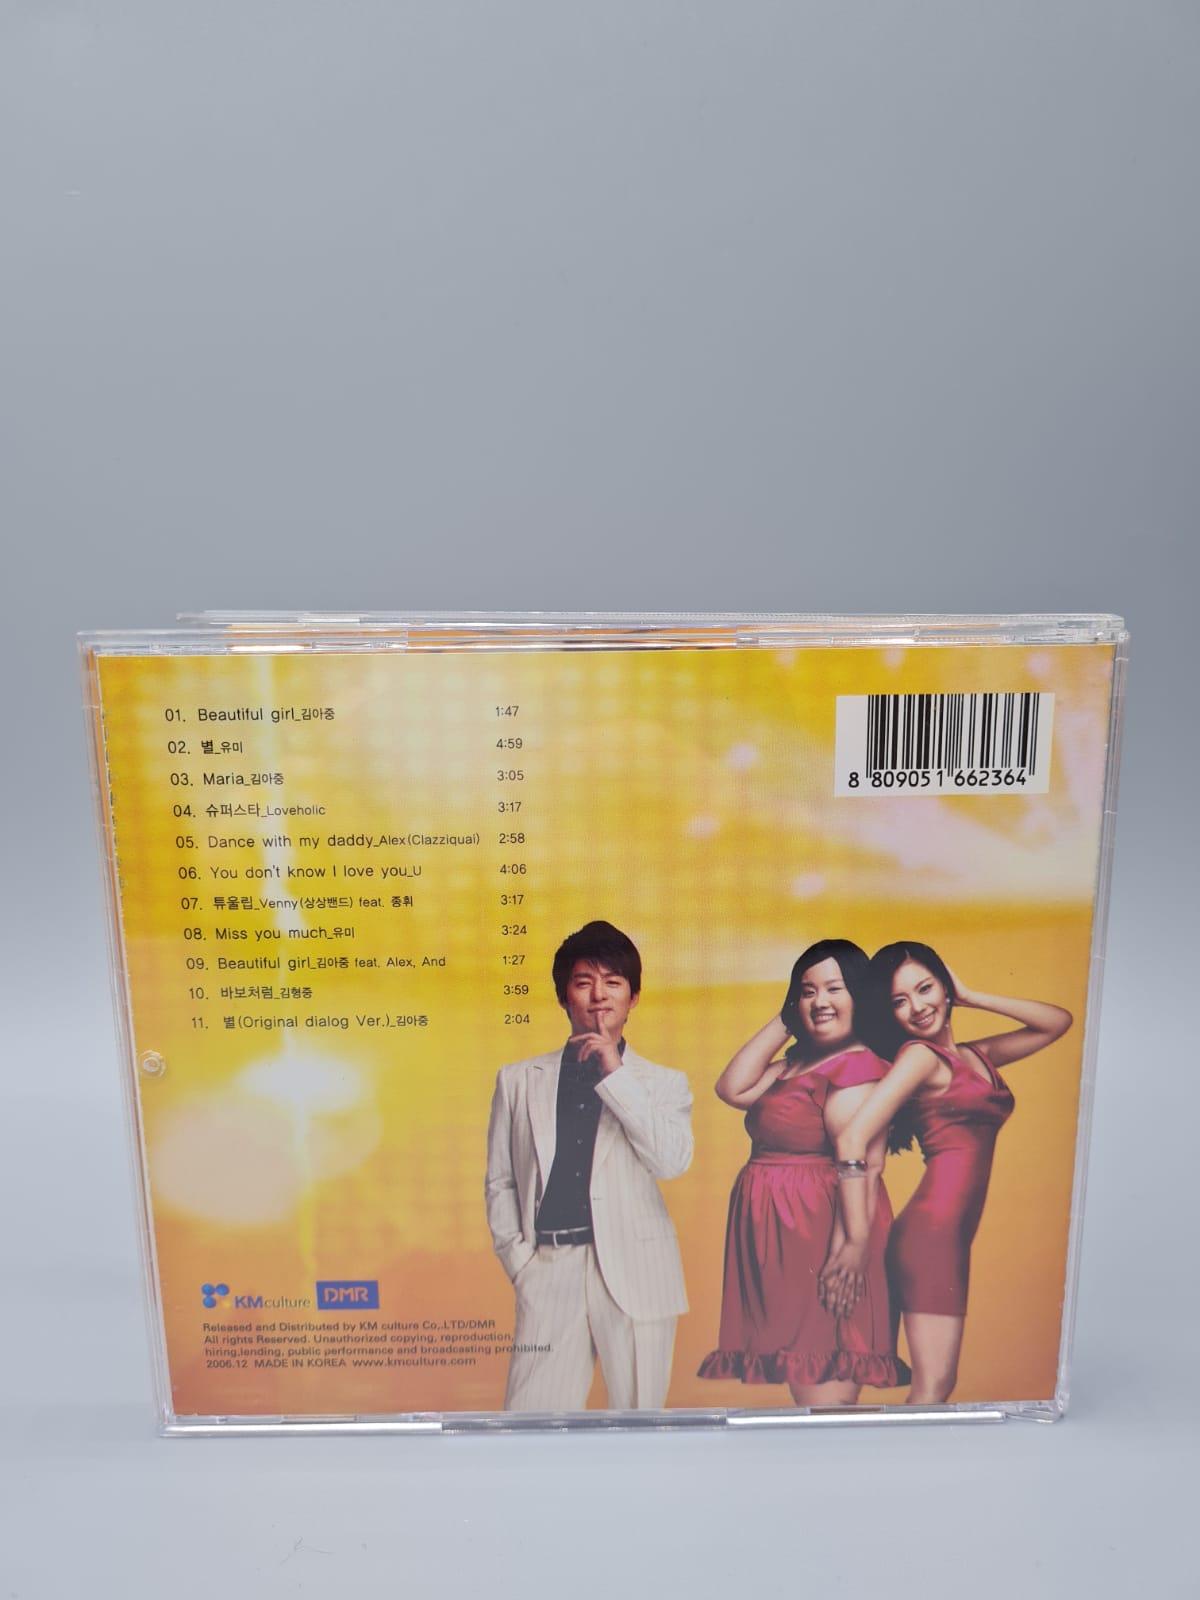 200 Pounds Beauty Korean Movie DVD + OST 3Disc Special Limited Edition English Subtitle Kim Ah Joong Joo Jin Mo